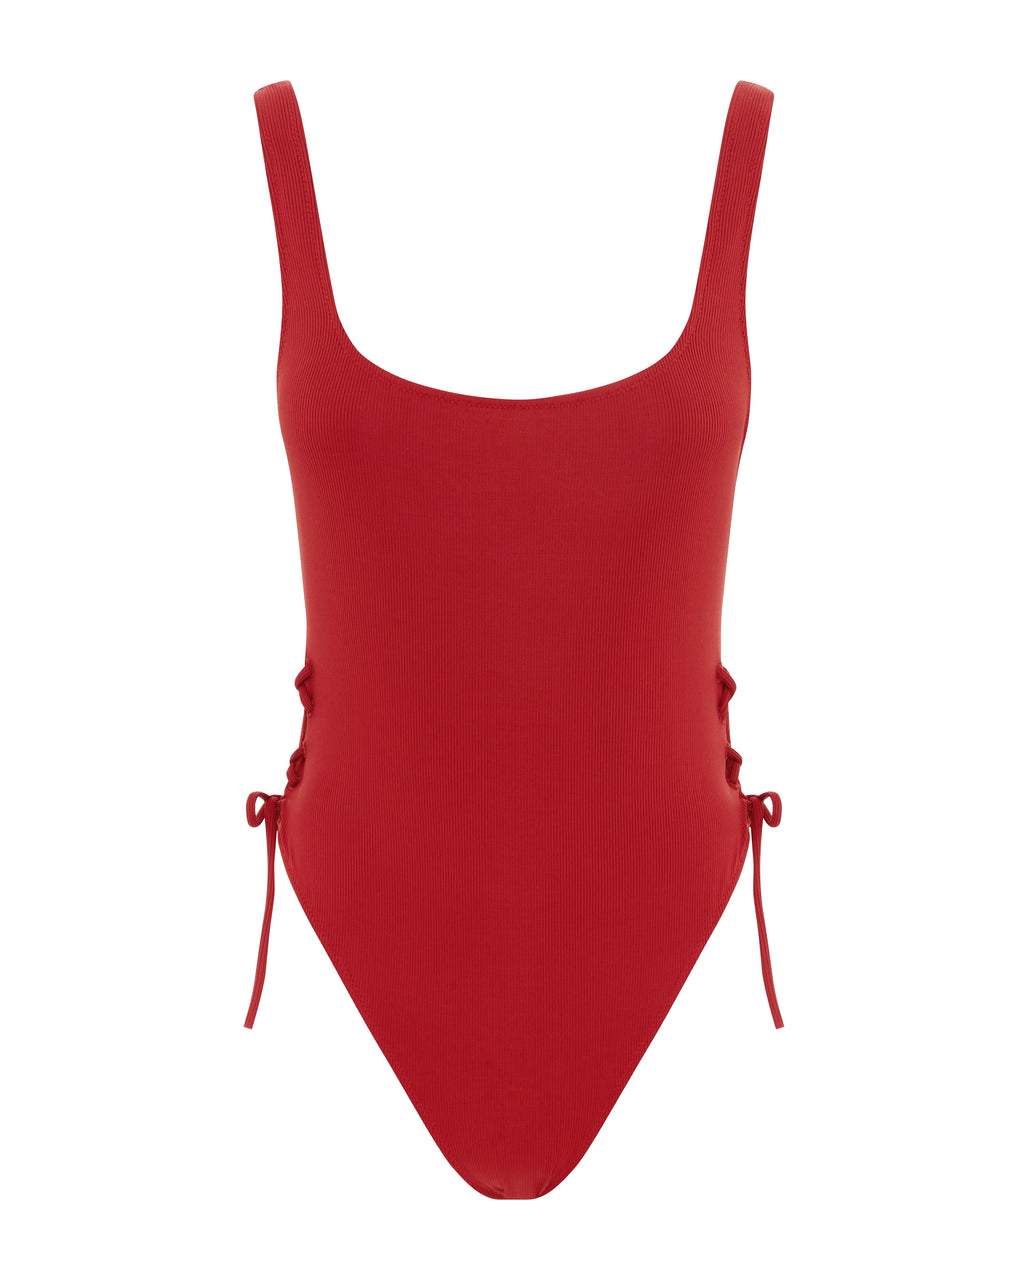 Pink Ribbed Tie Side One Piece - Lua Lua